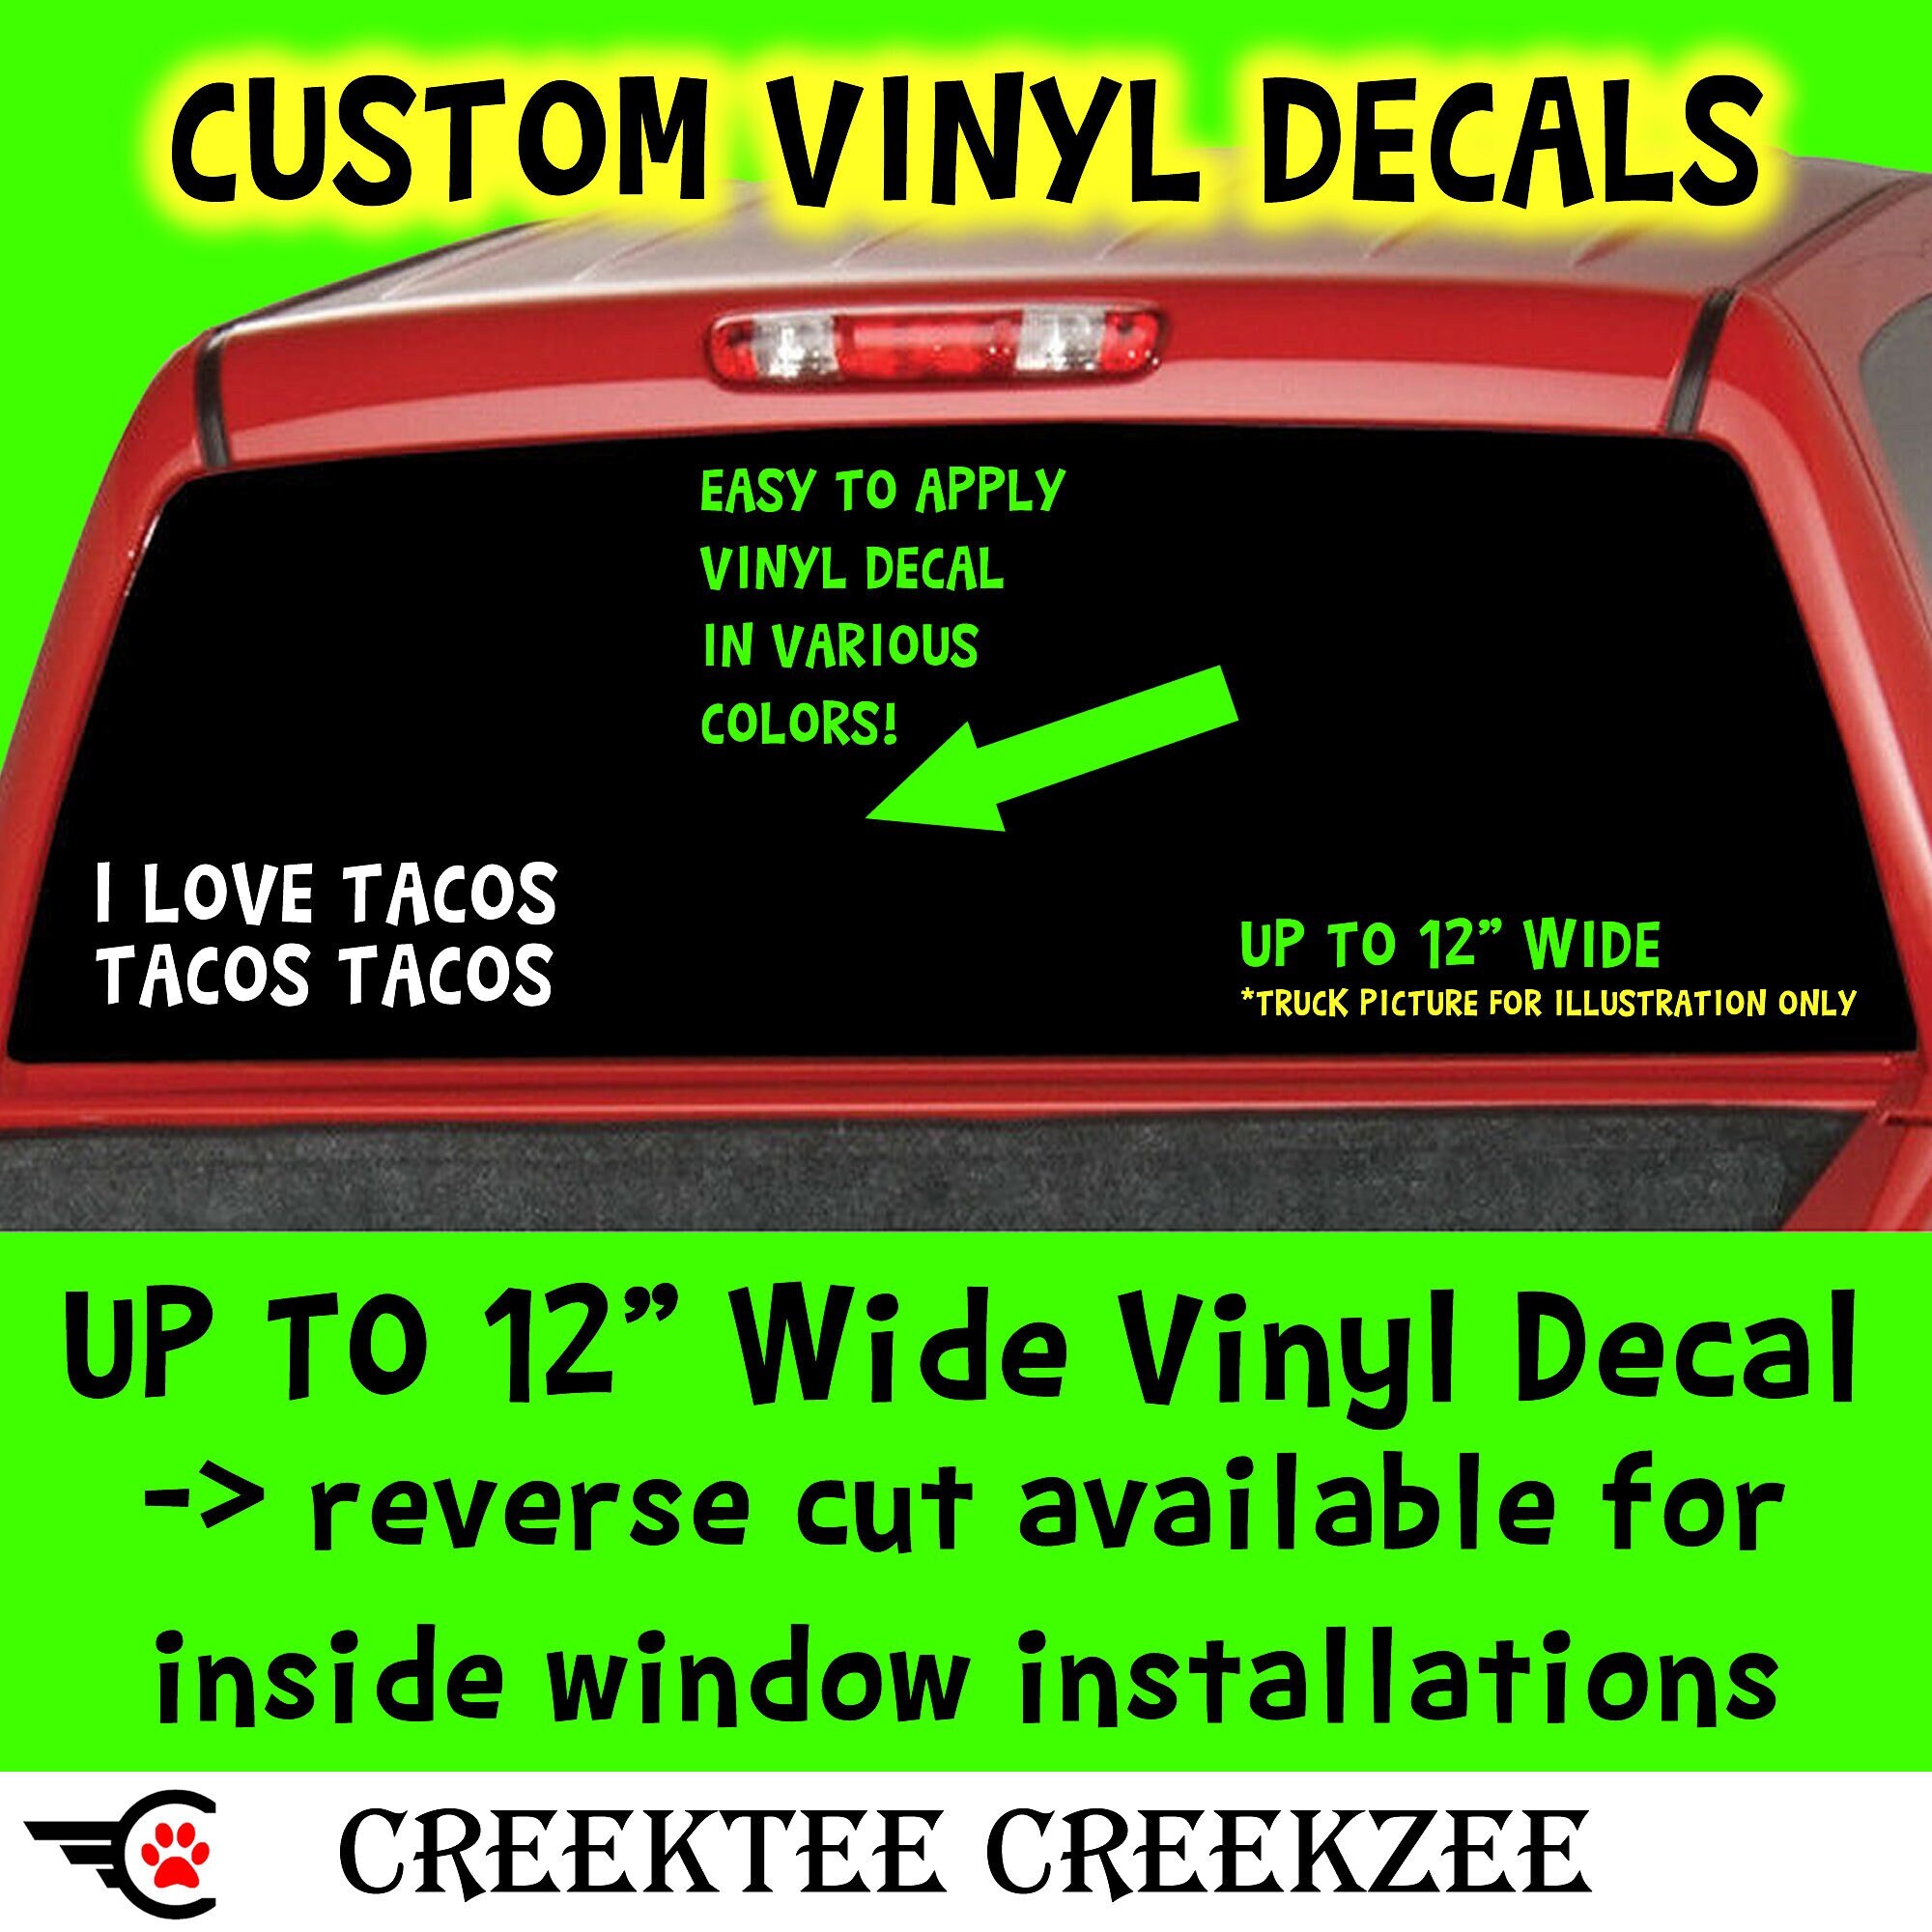 I love tacos tacos tacos in Color Vinyl Various Sizes and Colors Die Cut Vinyl Decal also in Cool Chrome Colors!